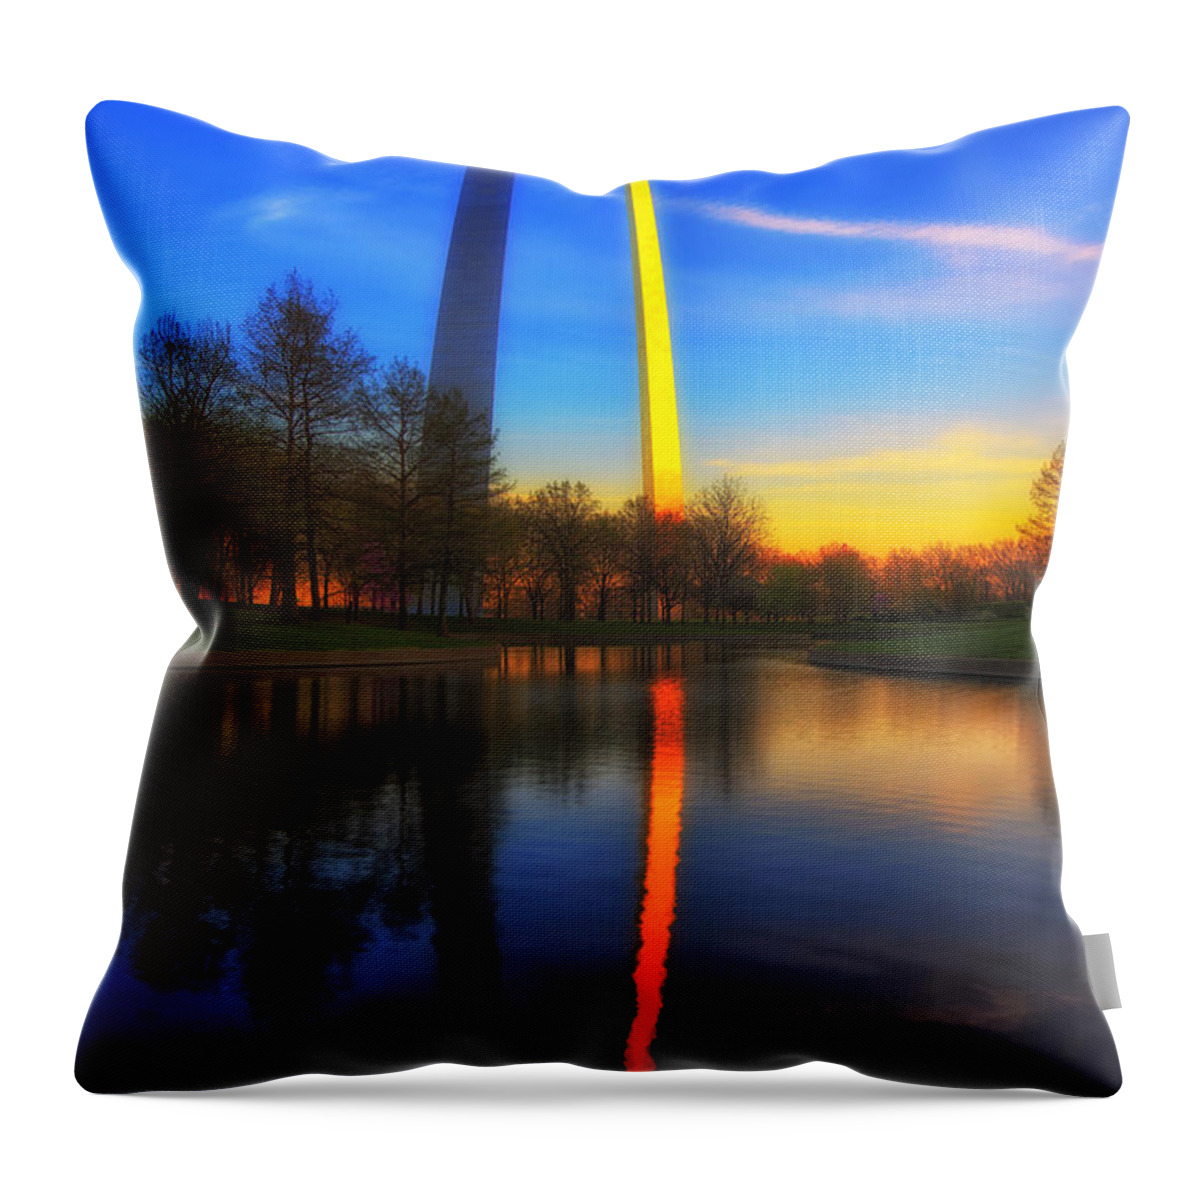 St. Throw Pillow featuring the photograph St. Loius Arch by Bill Frische